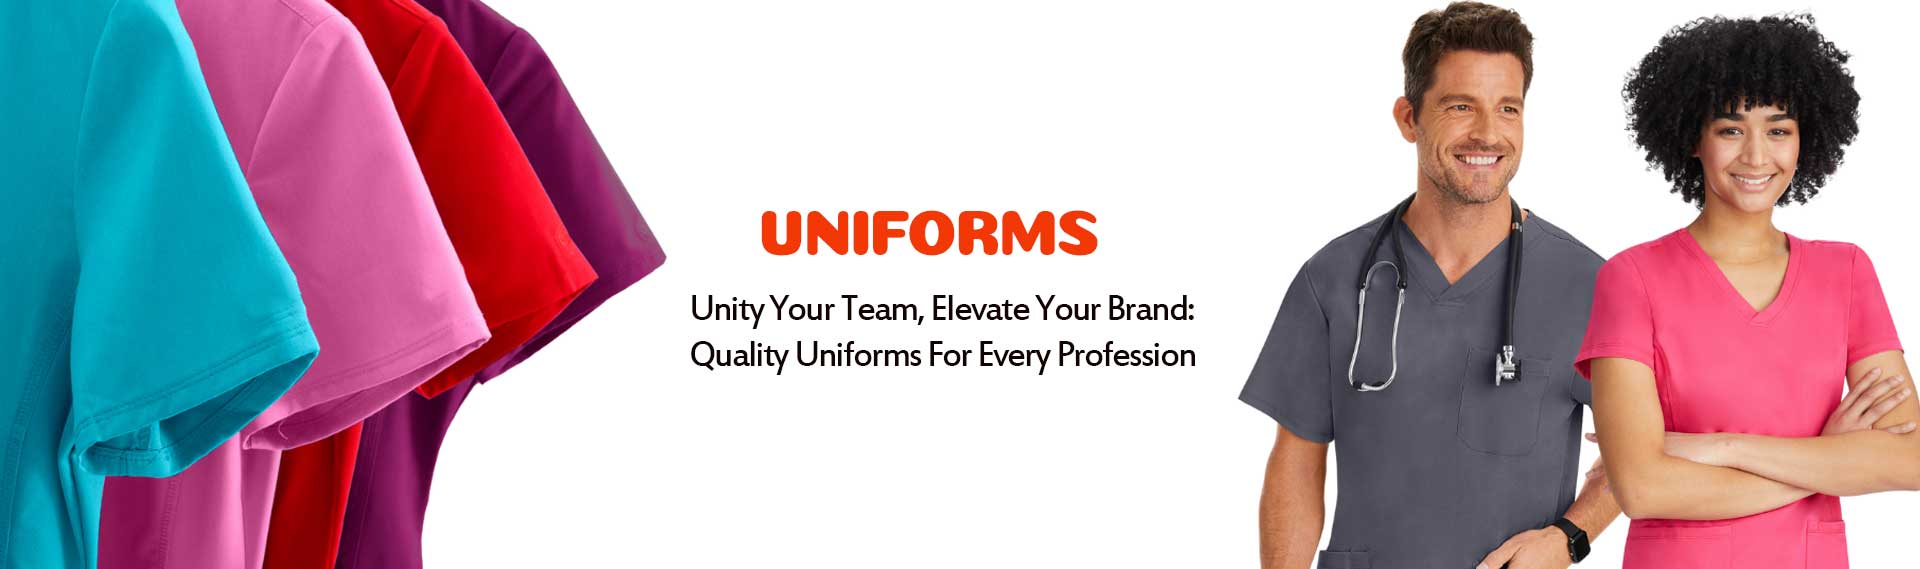 Uniforms Clothing Manufacturers in Israel